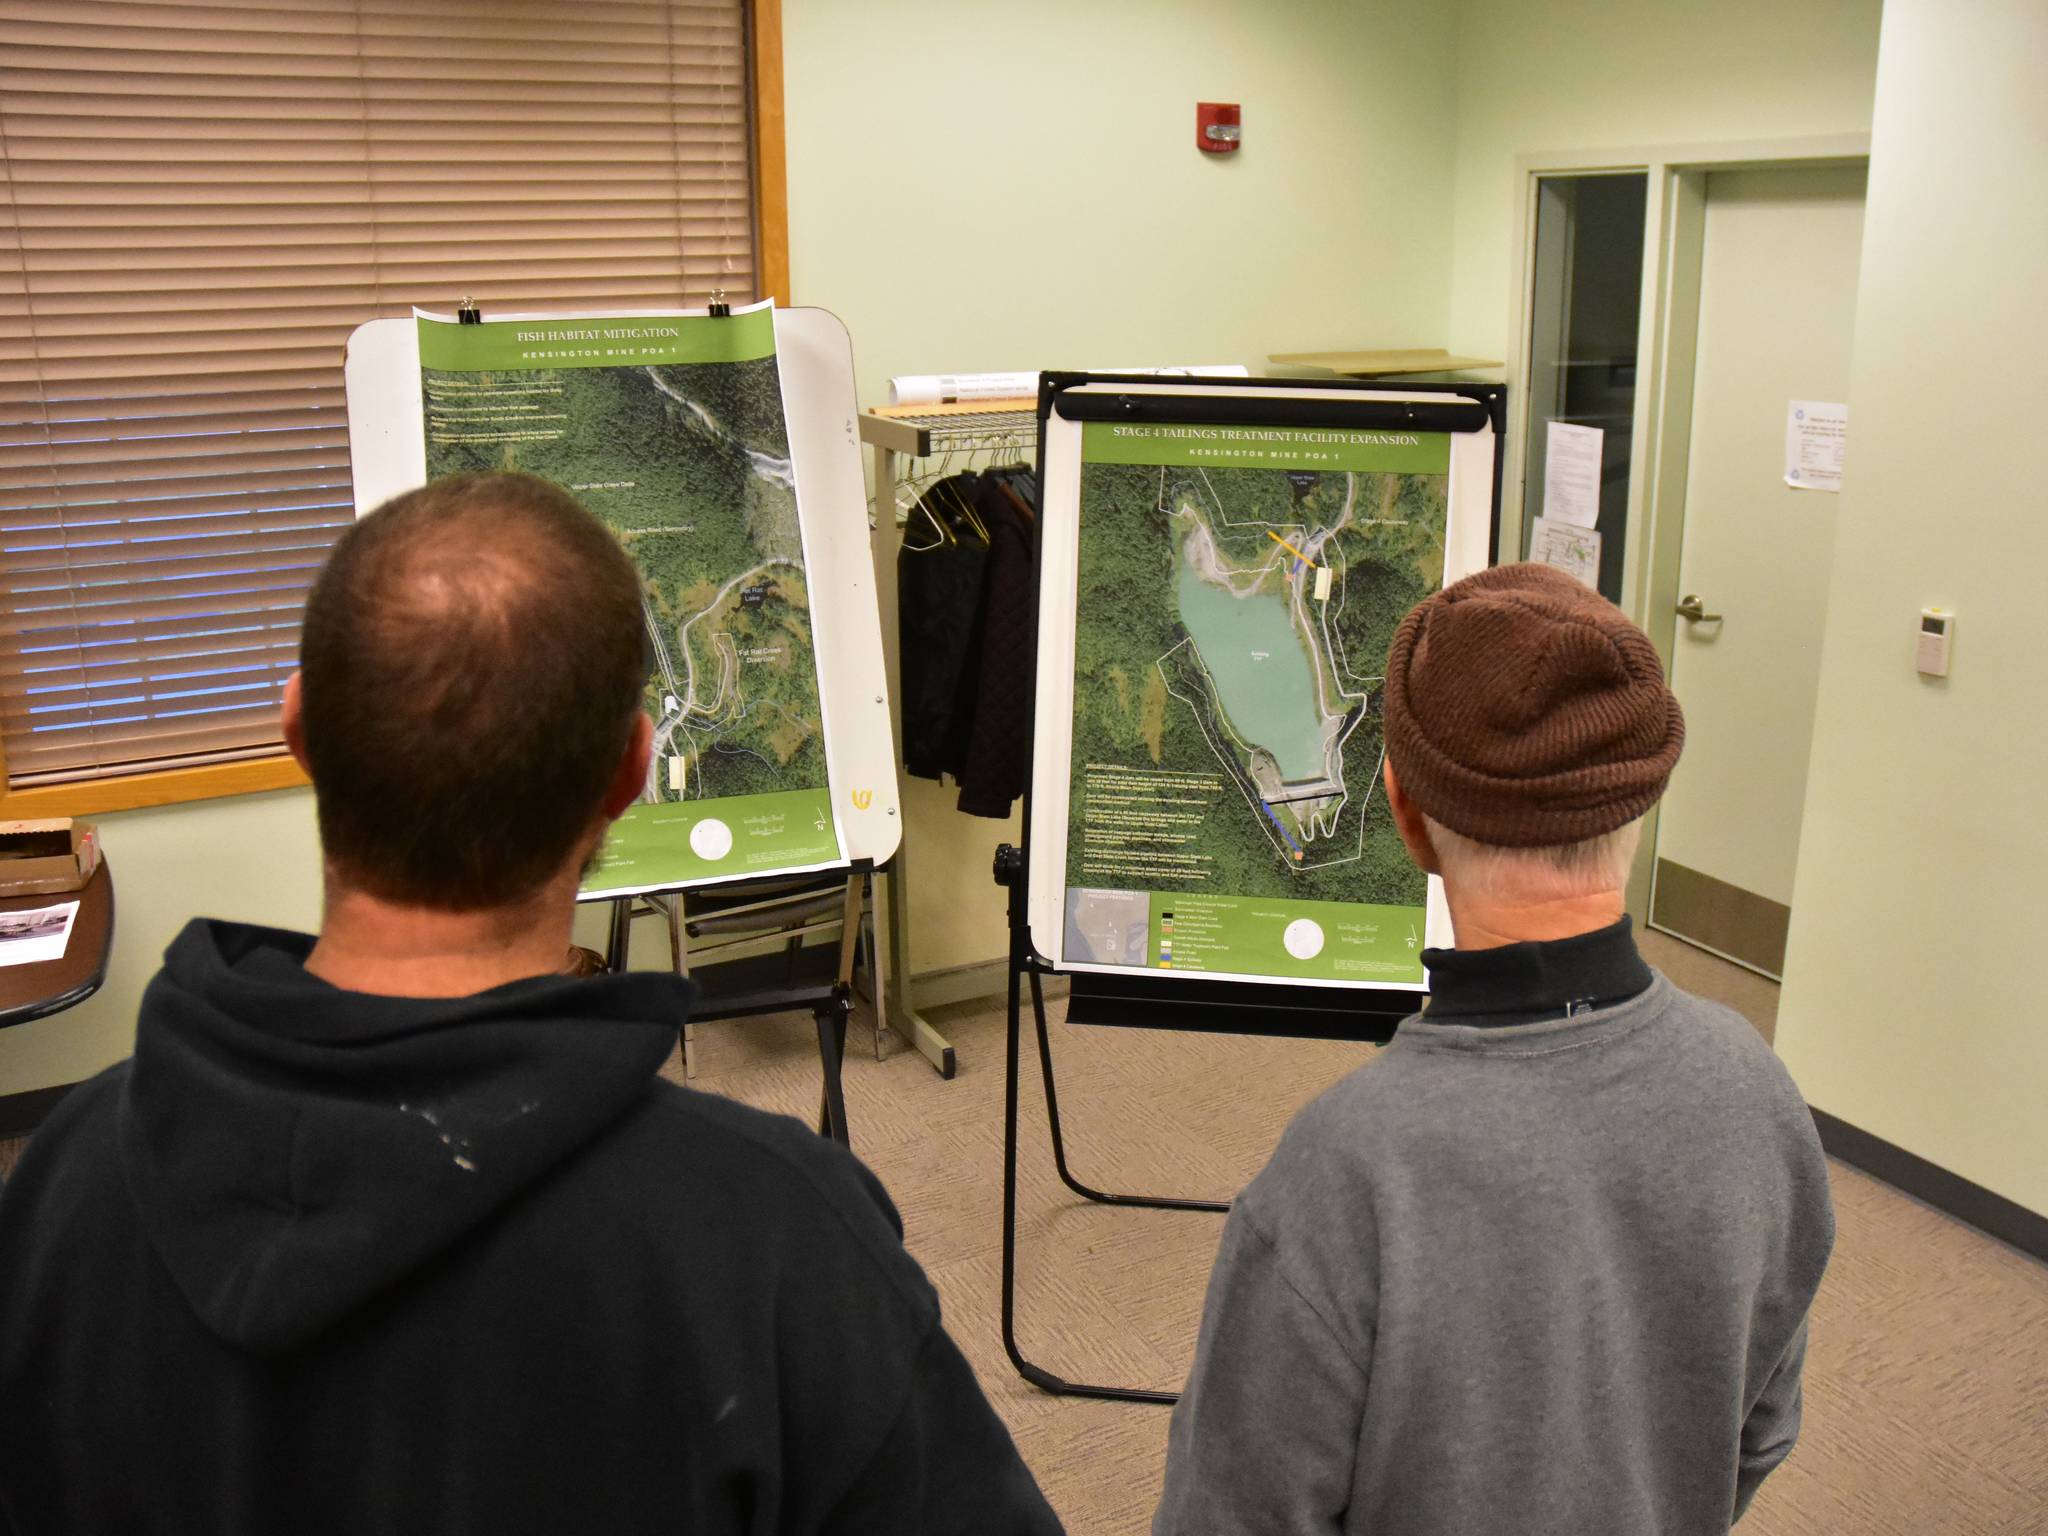 Members of the public examine maps of the proposed expansion to Coeur Alaska’s Kensington Mine facilities at the Juneau Ranger District Station on Oct. 8, 2019 (Peter Segall | Juneau Empire)